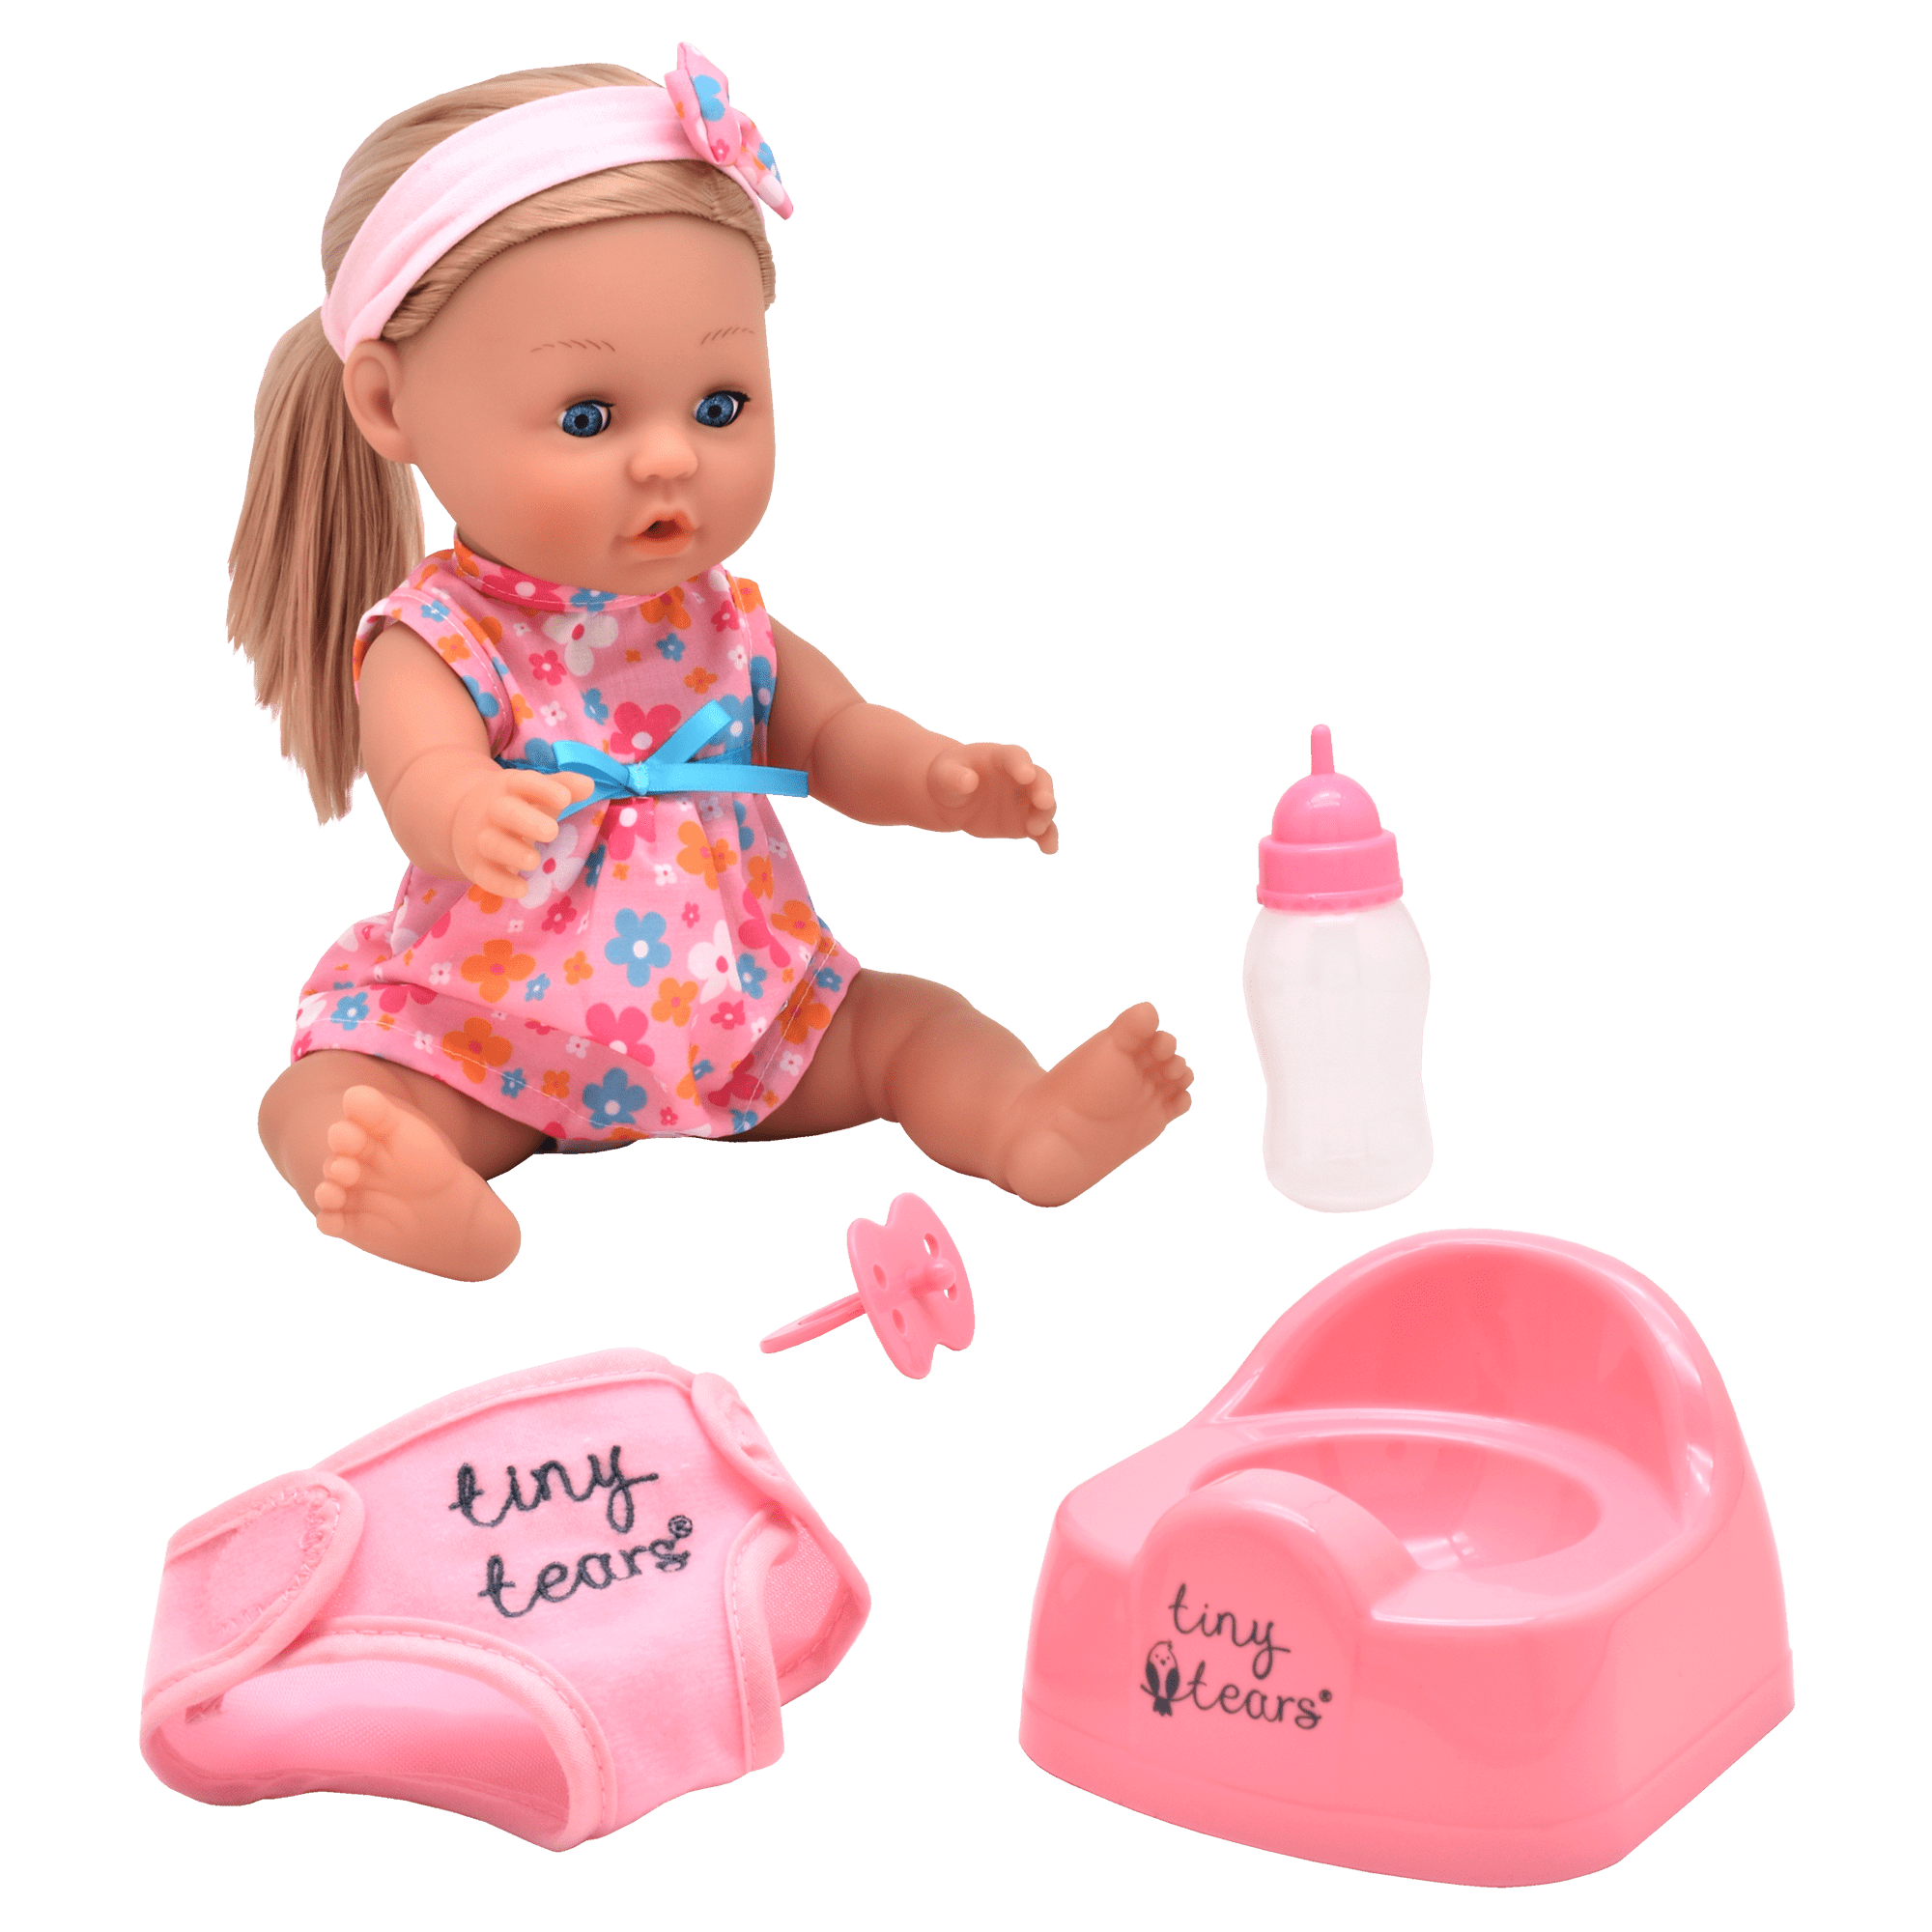 Tiny Tears Classic Crying & Wetting Doll